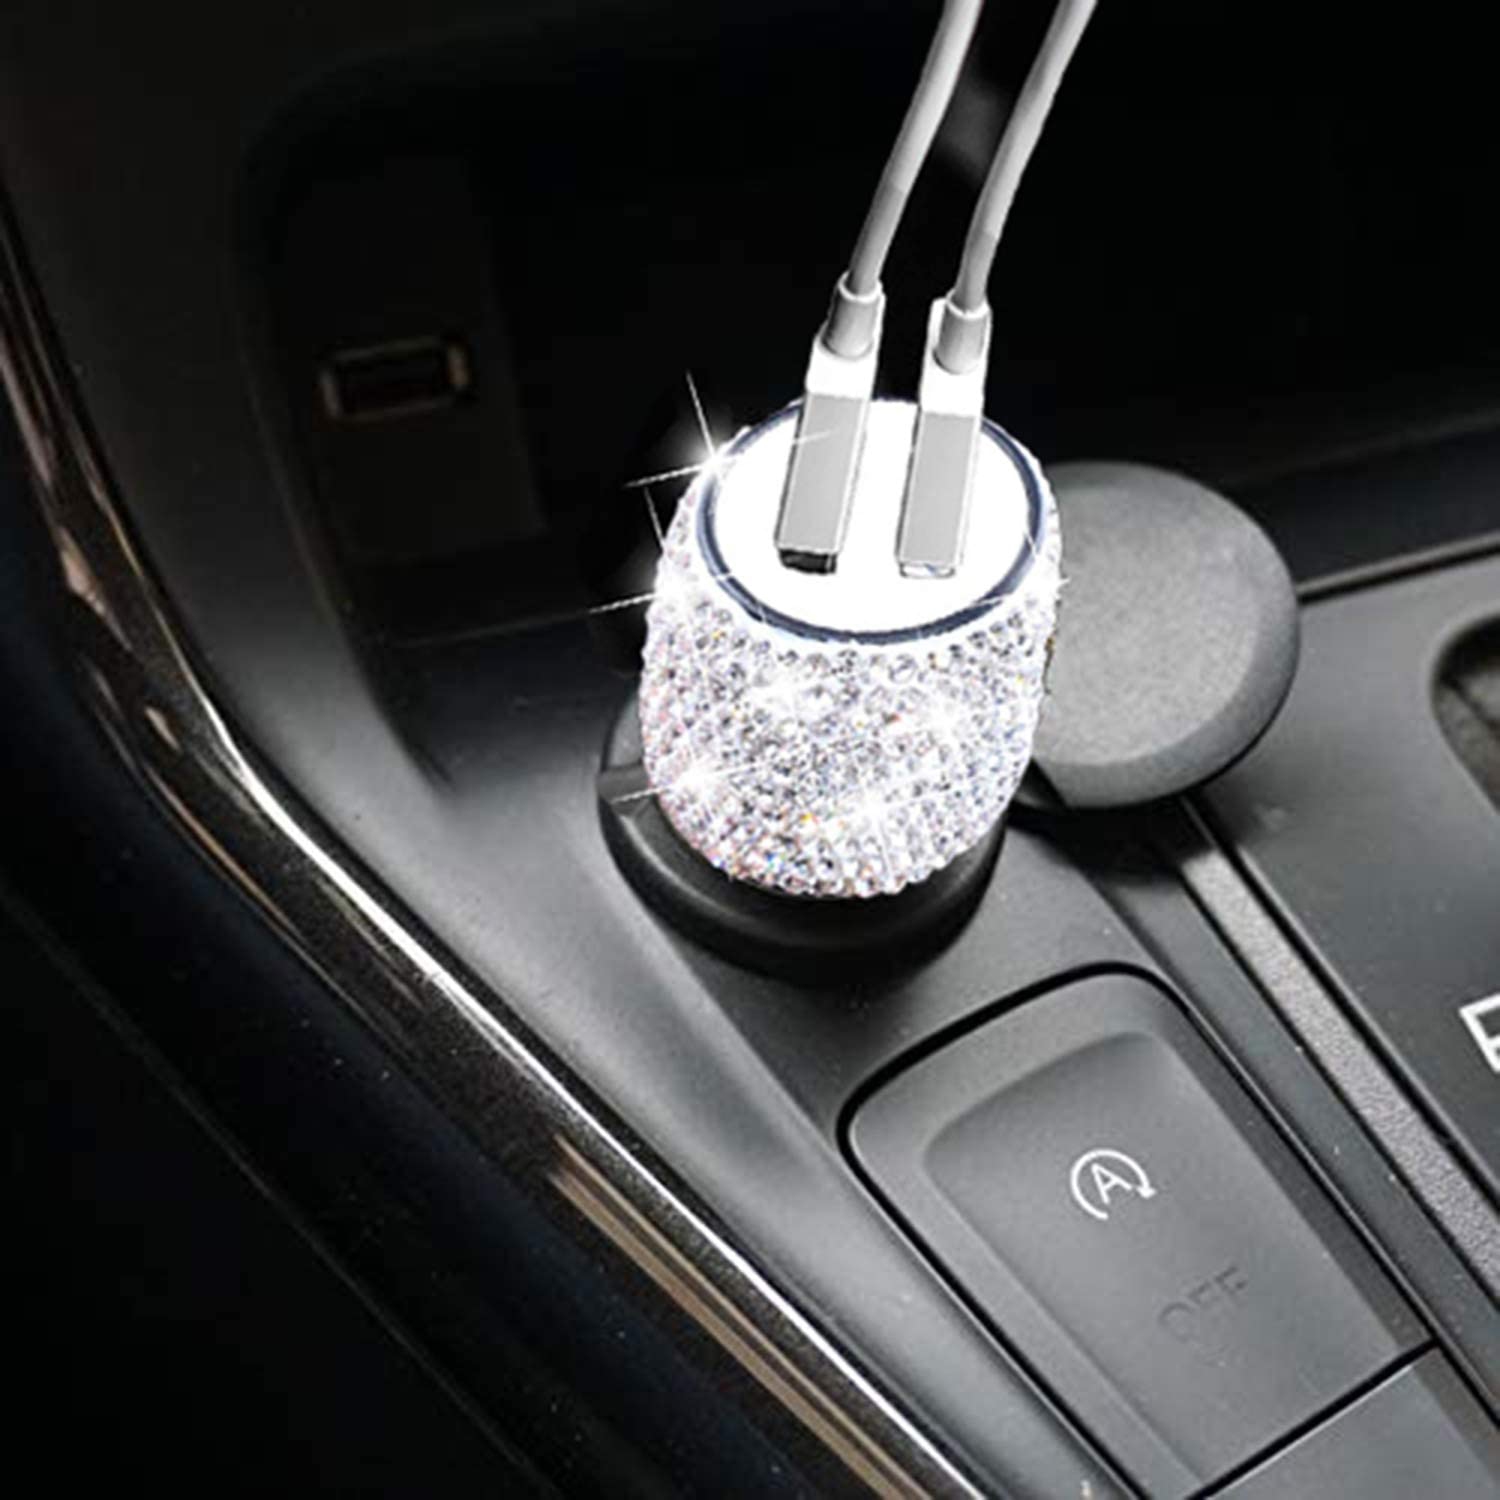 Dual USB Car Charger with Bling Bling Handmade Rhinestones Crystal, Car Decorations for Fast Charging, Car Decors for iPhone, iPad Pro/Air 2/Mini, Samsung Galaxy Note9/8/S9/S9+,LG,